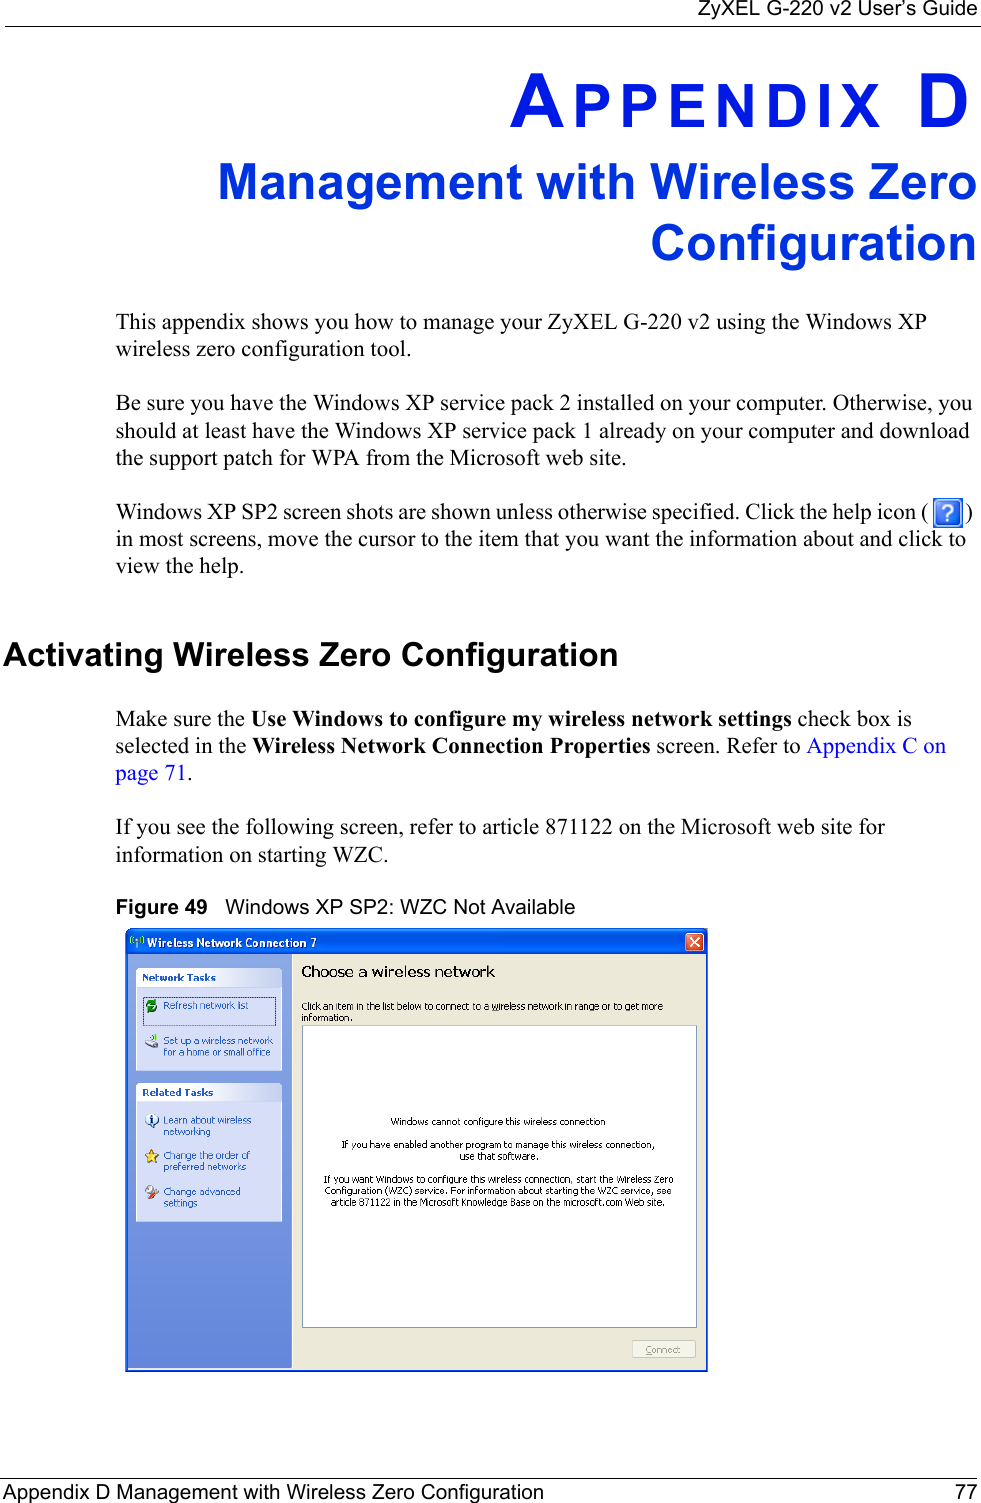 ZyXEL G-220 v2 User’s GuideAppendix D Management with Wireless Zero Configuration 77APPENDIX DManagement with Wireless ZeroConfigurationThis appendix shows you how to manage your ZyXEL G-220 v2 using the Windows XP wireless zero configuration tool.Be sure you have the Windows XP service pack 2 installed on your computer. Otherwise, you should at least have the Windows XP service pack 1 already on your computer and download the support patch for WPA from the Microsoft web site.Windows XP SP2 screen shots are shown unless otherwise specified. Click the help icon ( ) in most screens, move the cursor to the item that you want the information about and click to view the help.Activating Wireless Zero ConfigurationMake sure the Use Windows to configure my wireless network settings check box is selected in the Wireless Network Connection Properties screen. Refer to Appendix C on page 71.If you see the following screen, refer to article 871122 on the Microsoft web site for information on starting WZC.Figure 49   Windows XP SP2: WZC Not Available